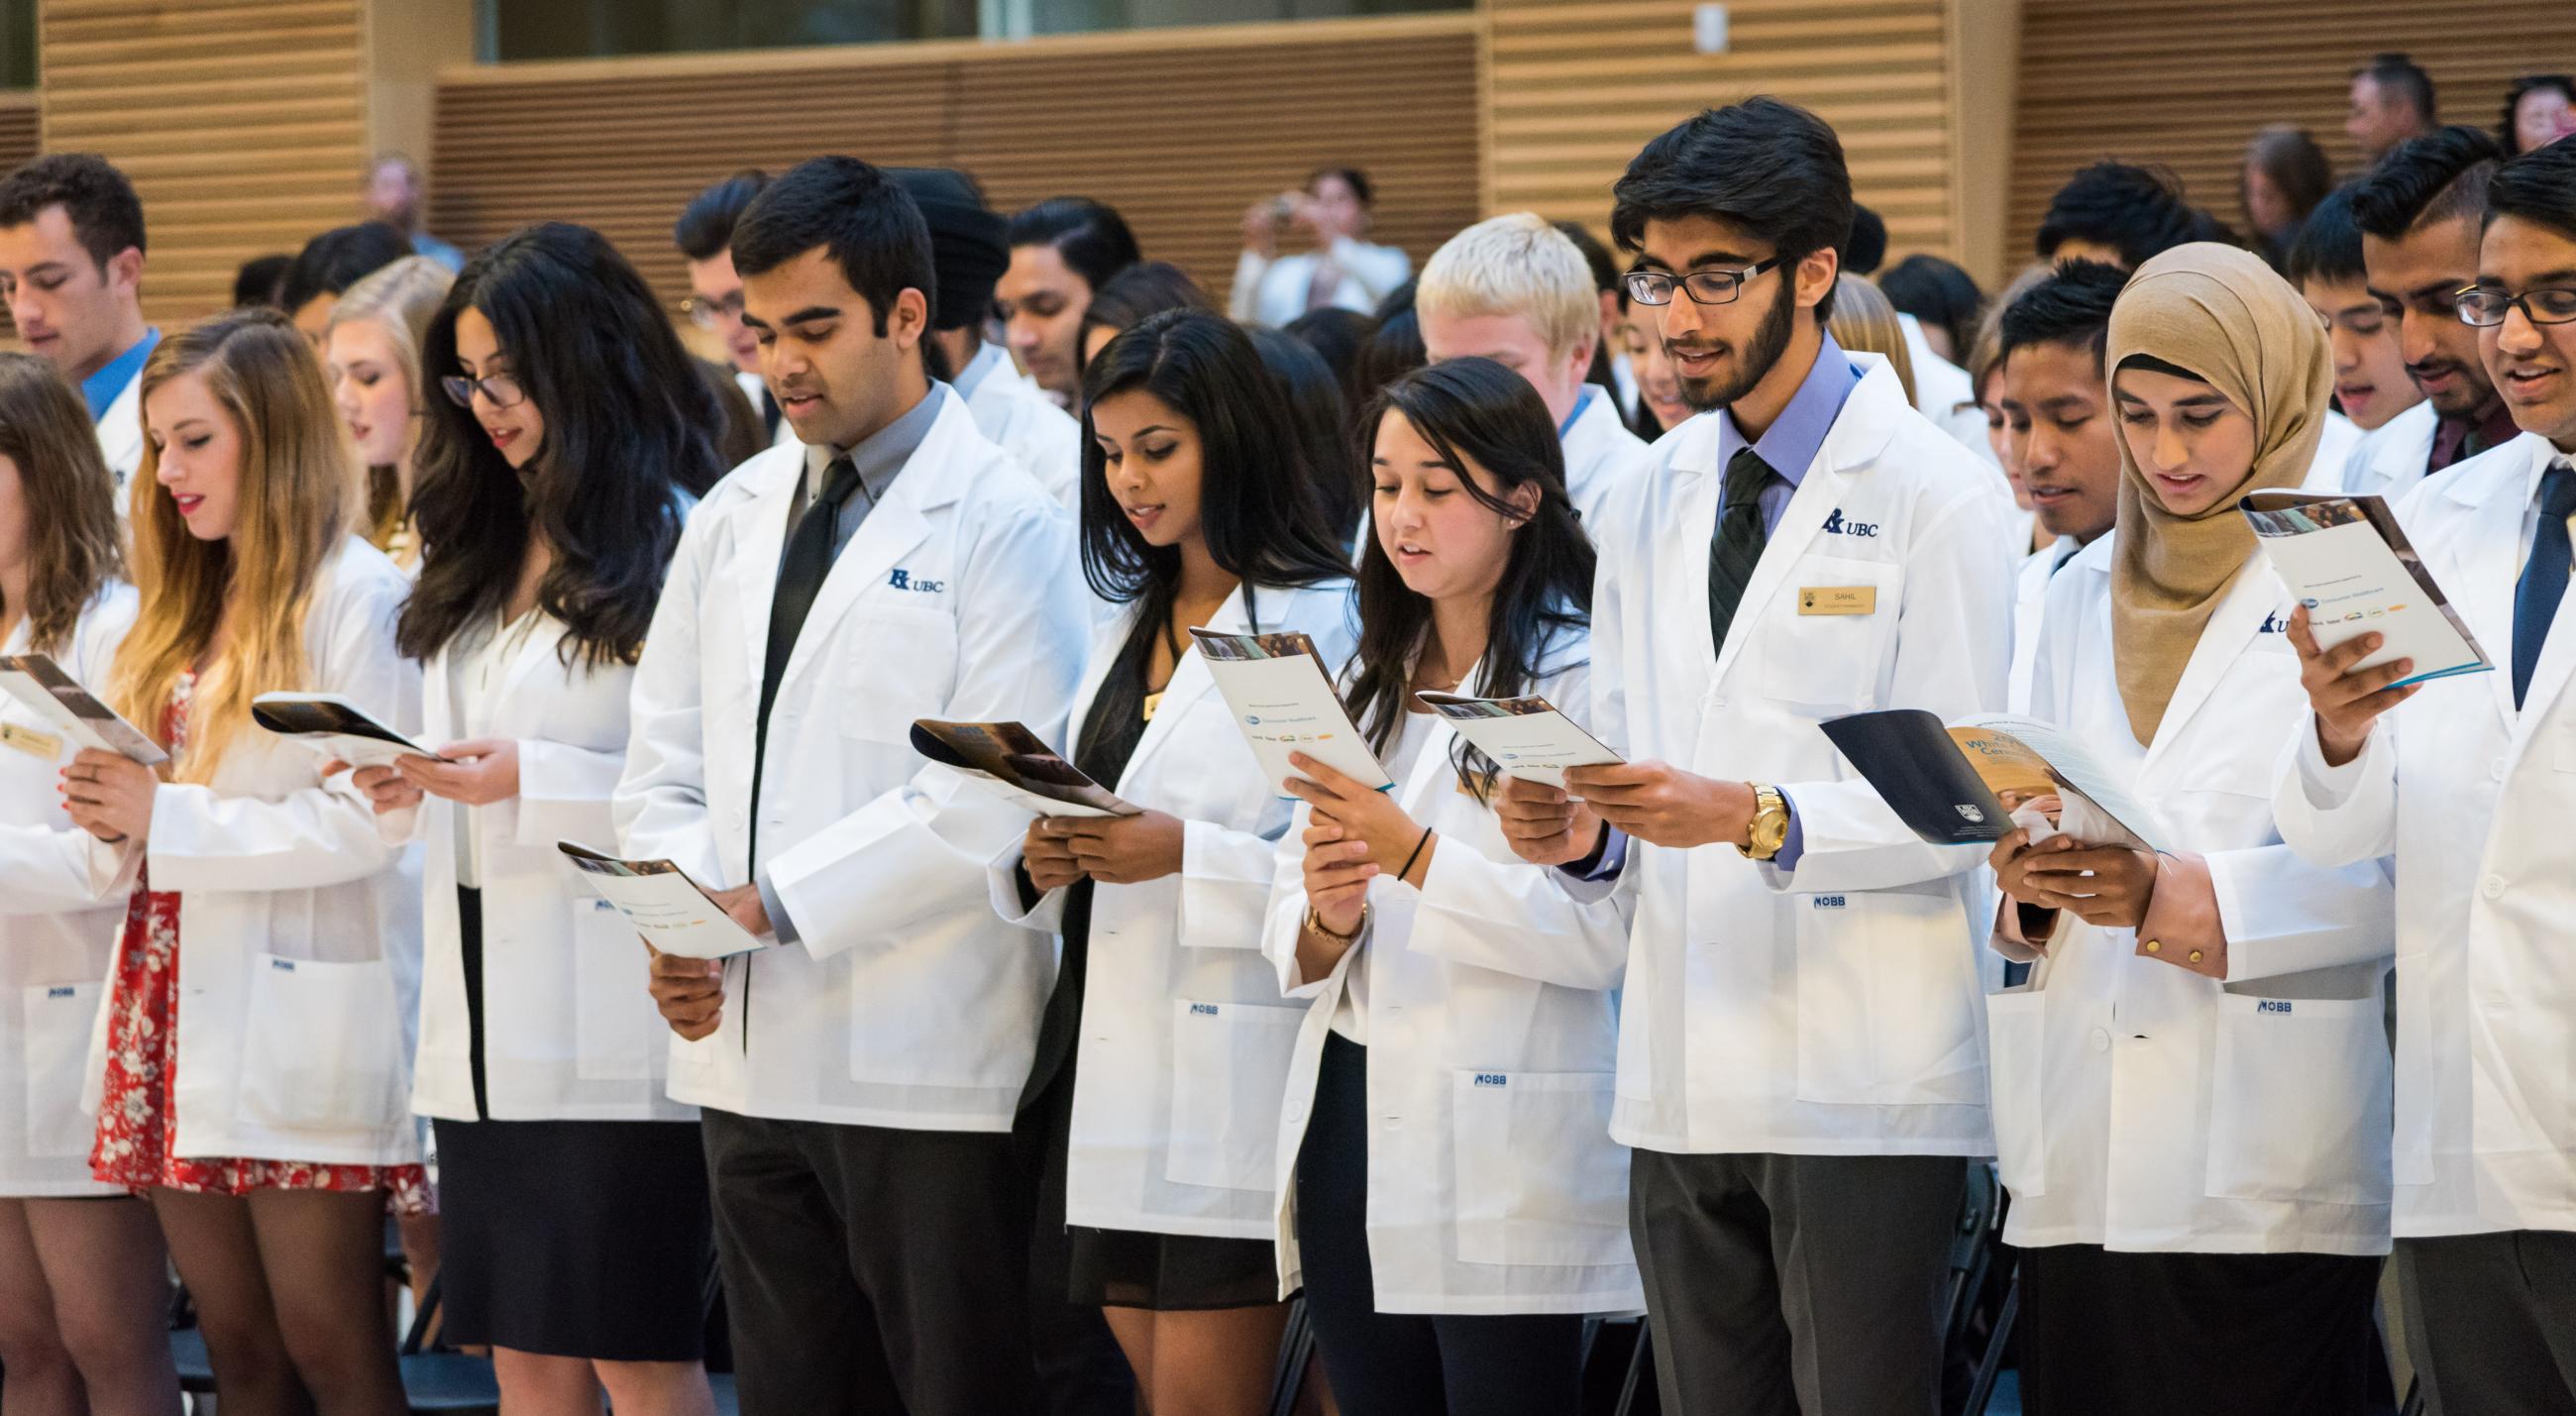 Class of 2019 at the 2015 White Coat Ceremony